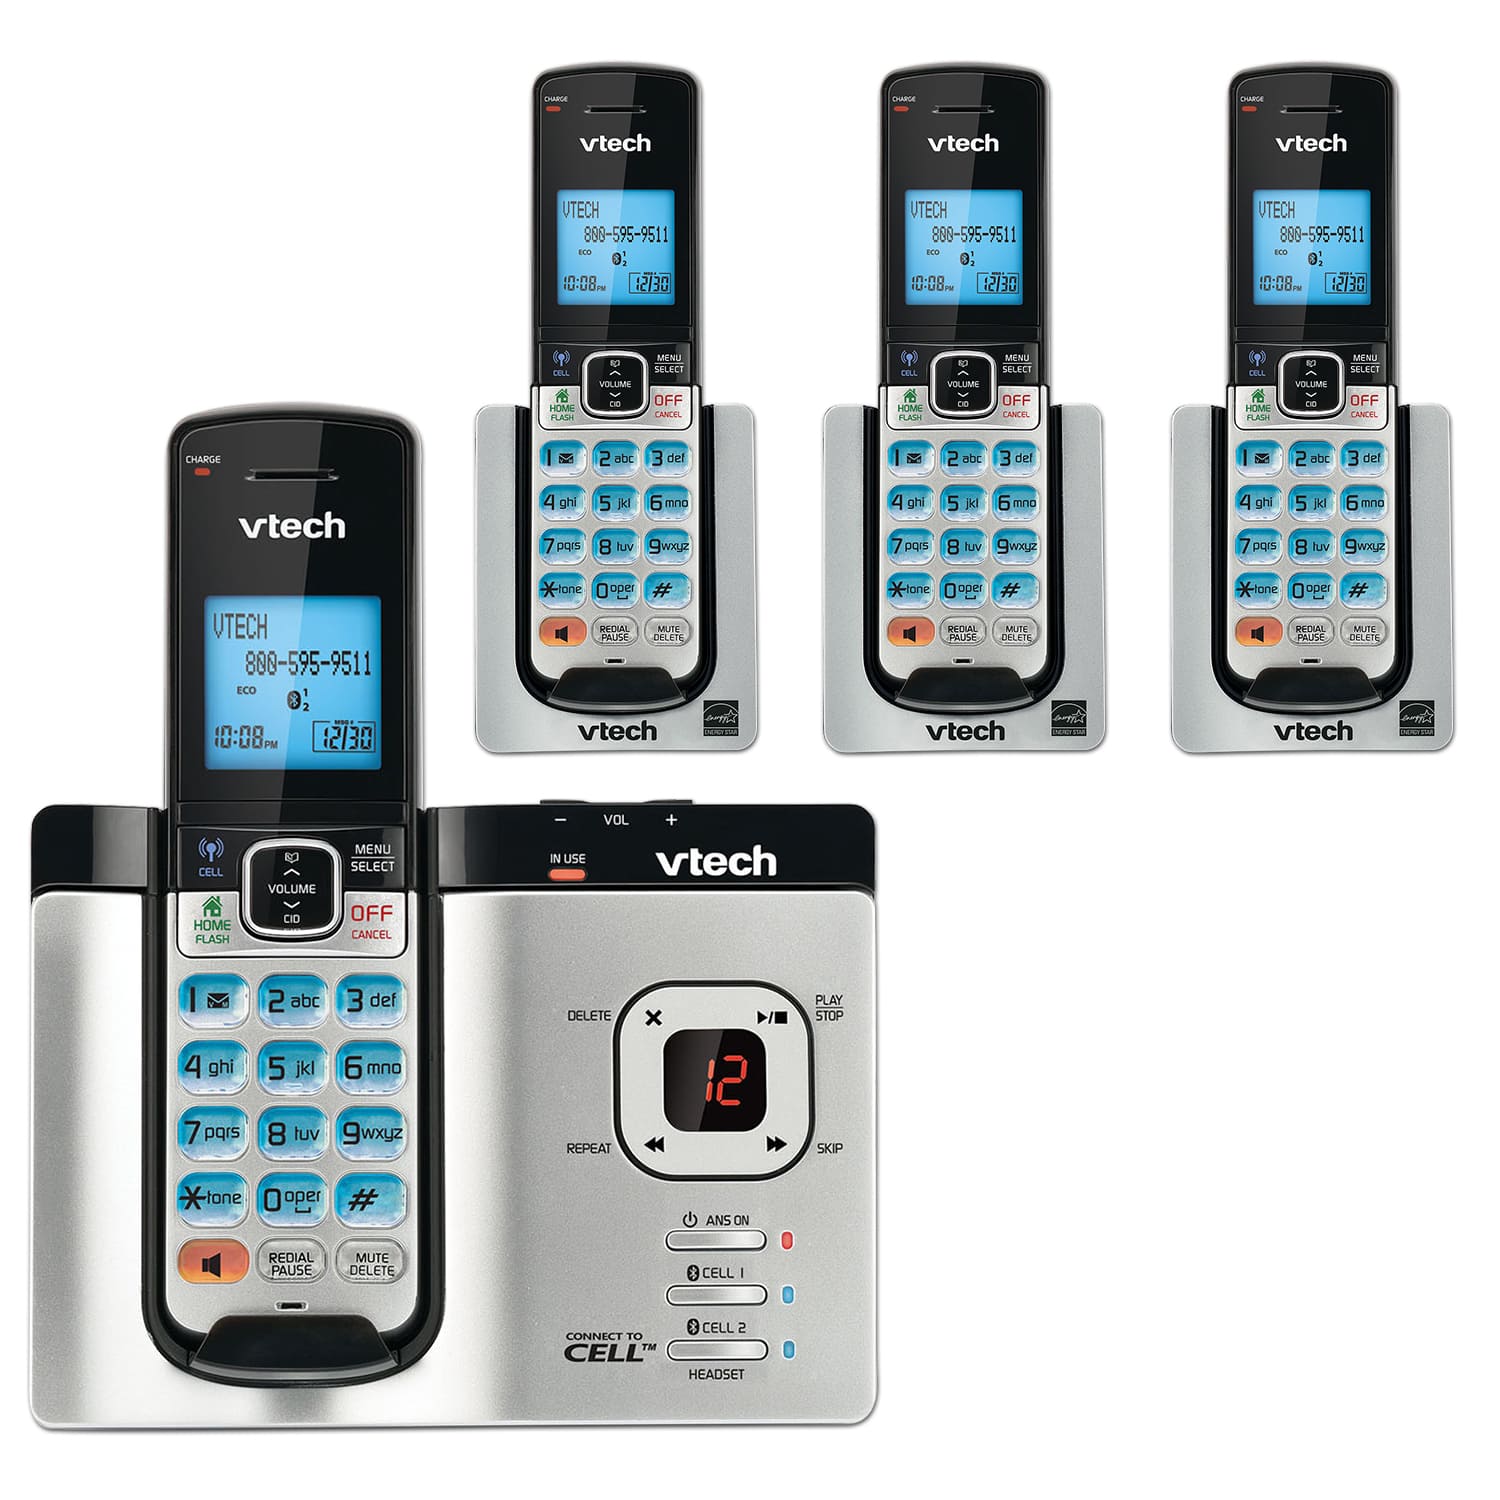 4 Handset Connect to Cell™ Phone System with Caller ID/Call Waiting - view 1